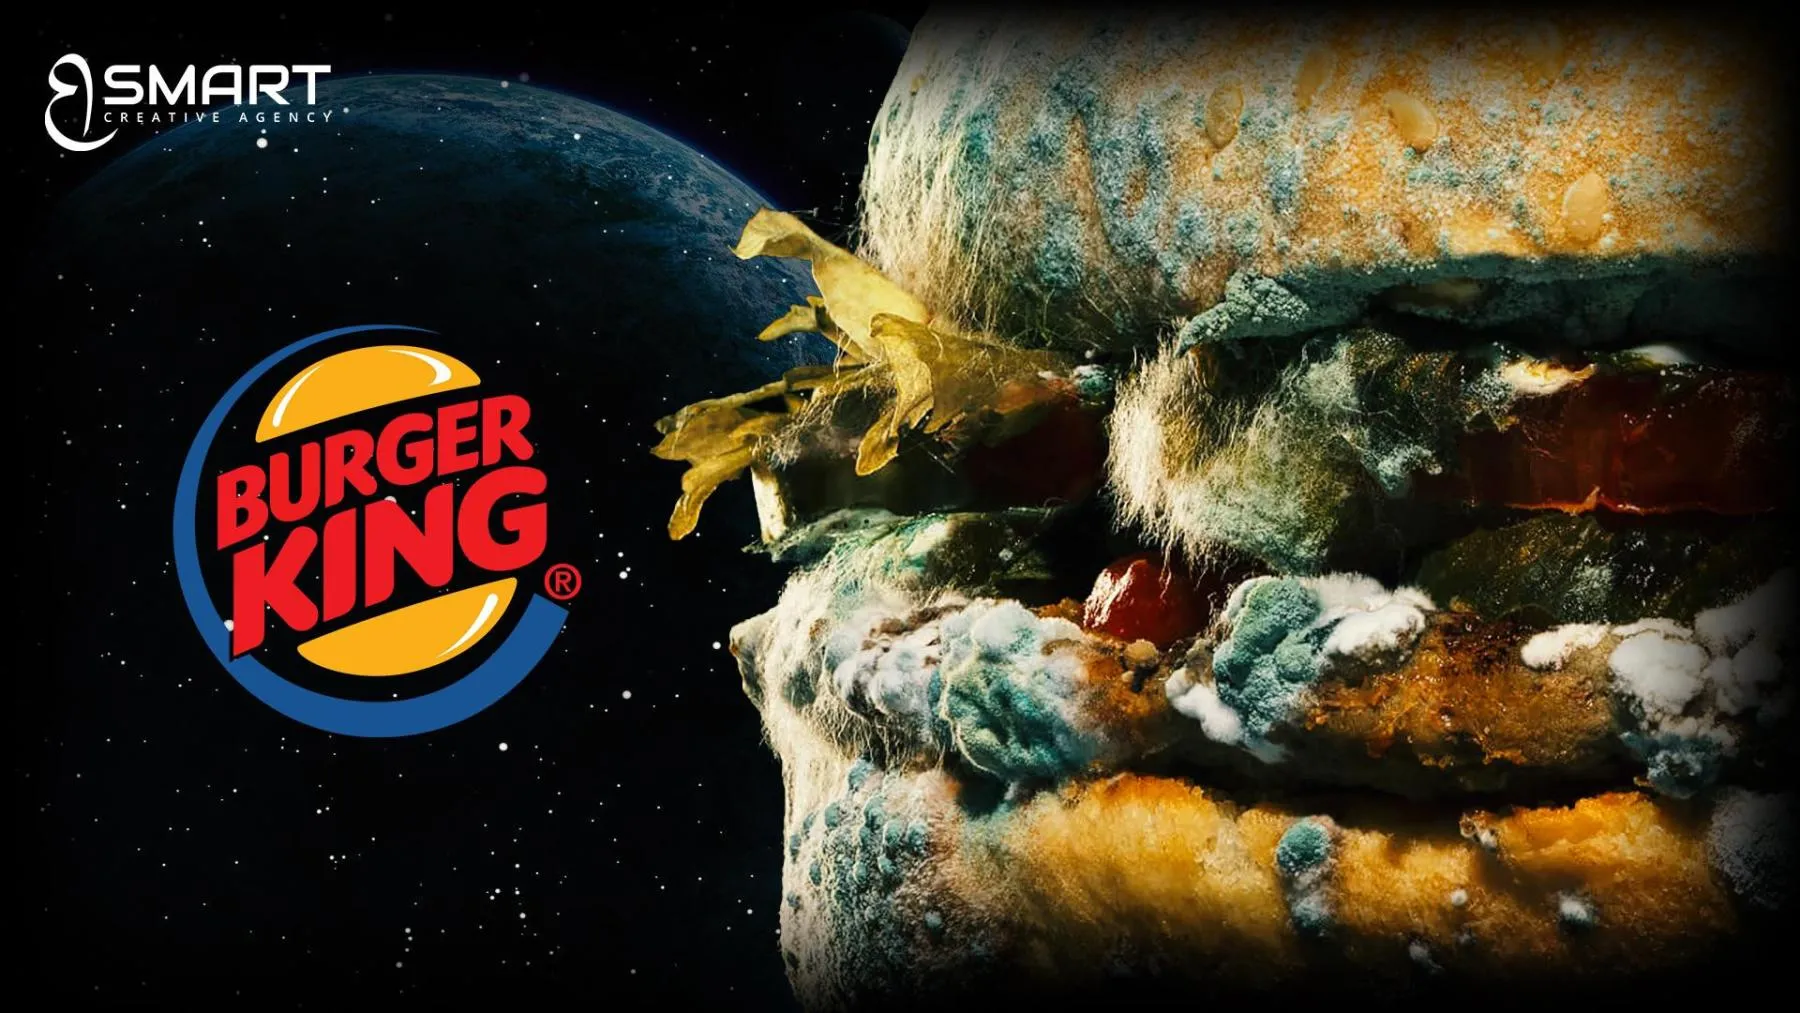 Burger king “Moldy whopper” campaign breaks the usual stereotype.